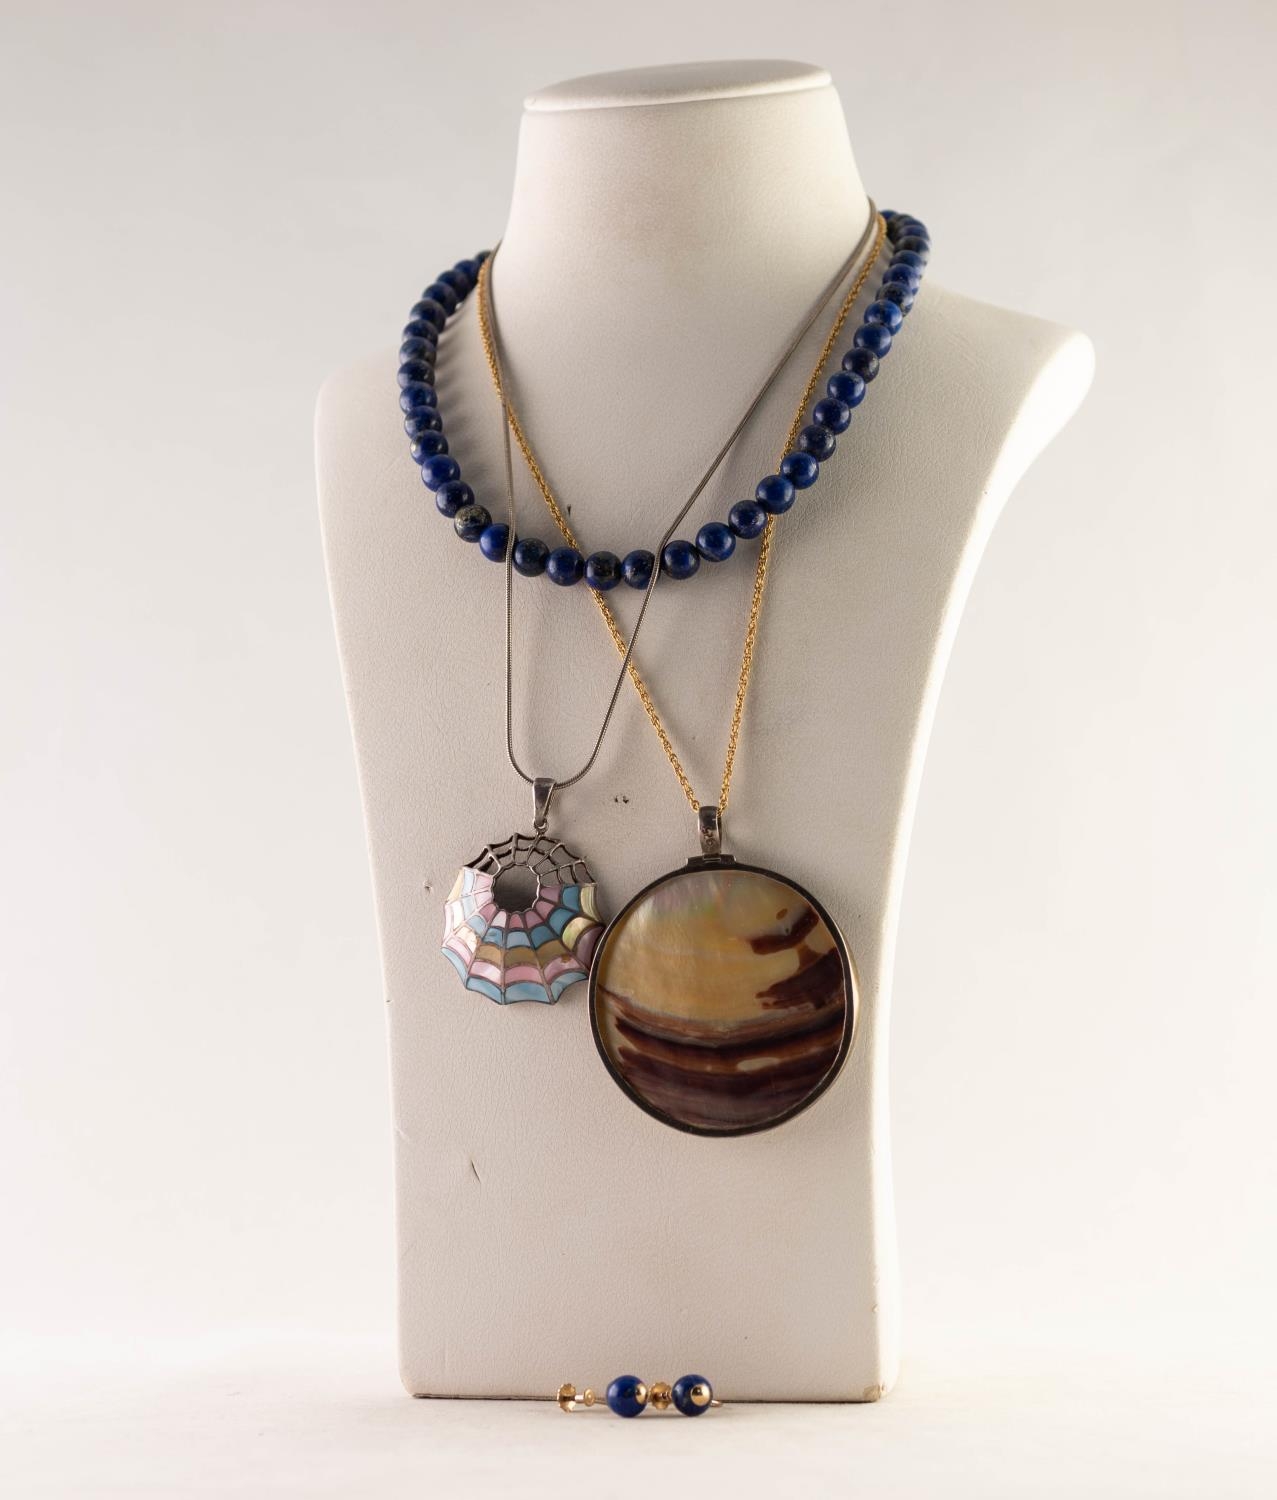 PAIR OF 9ct GOLD AND LAPIS LAZULI BEAD EARRINGS; a SINGLE STRAND NECKLACE OF UNIFORM LAPIS LAZULI